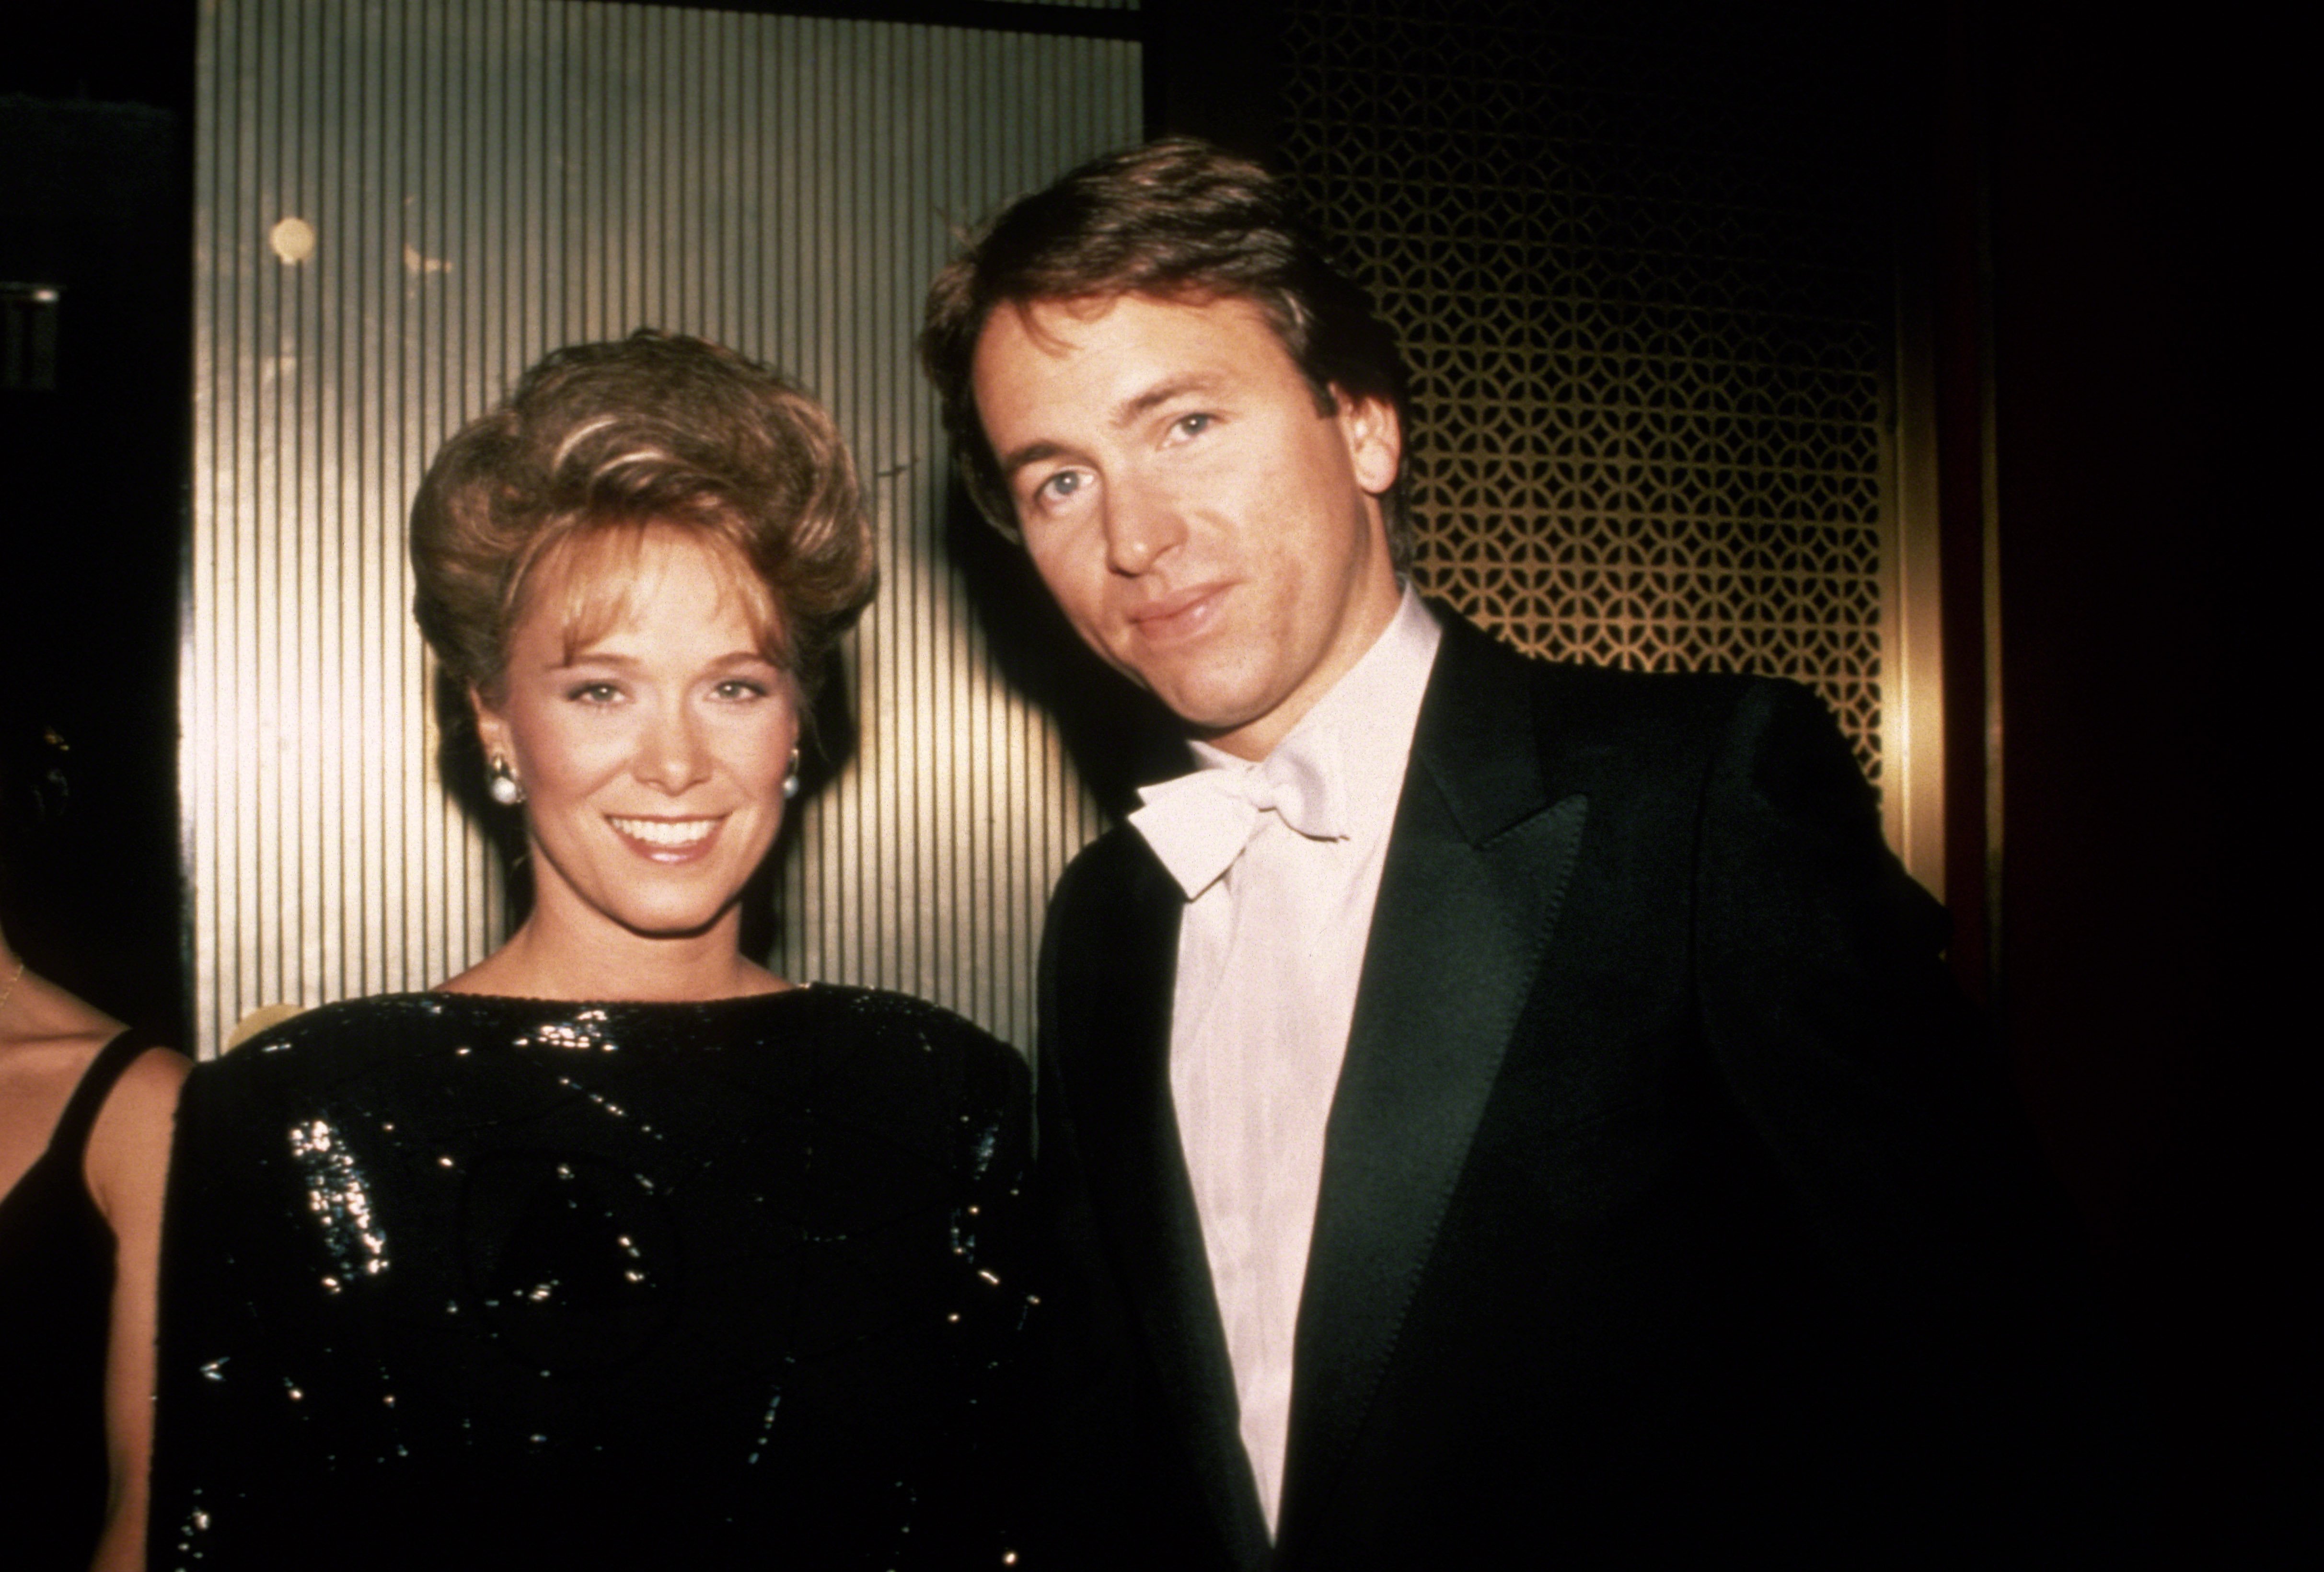 Actor John Ritter and his former wife, Nancy Morgan in New York City, circa 1983. | Source: Getty Images